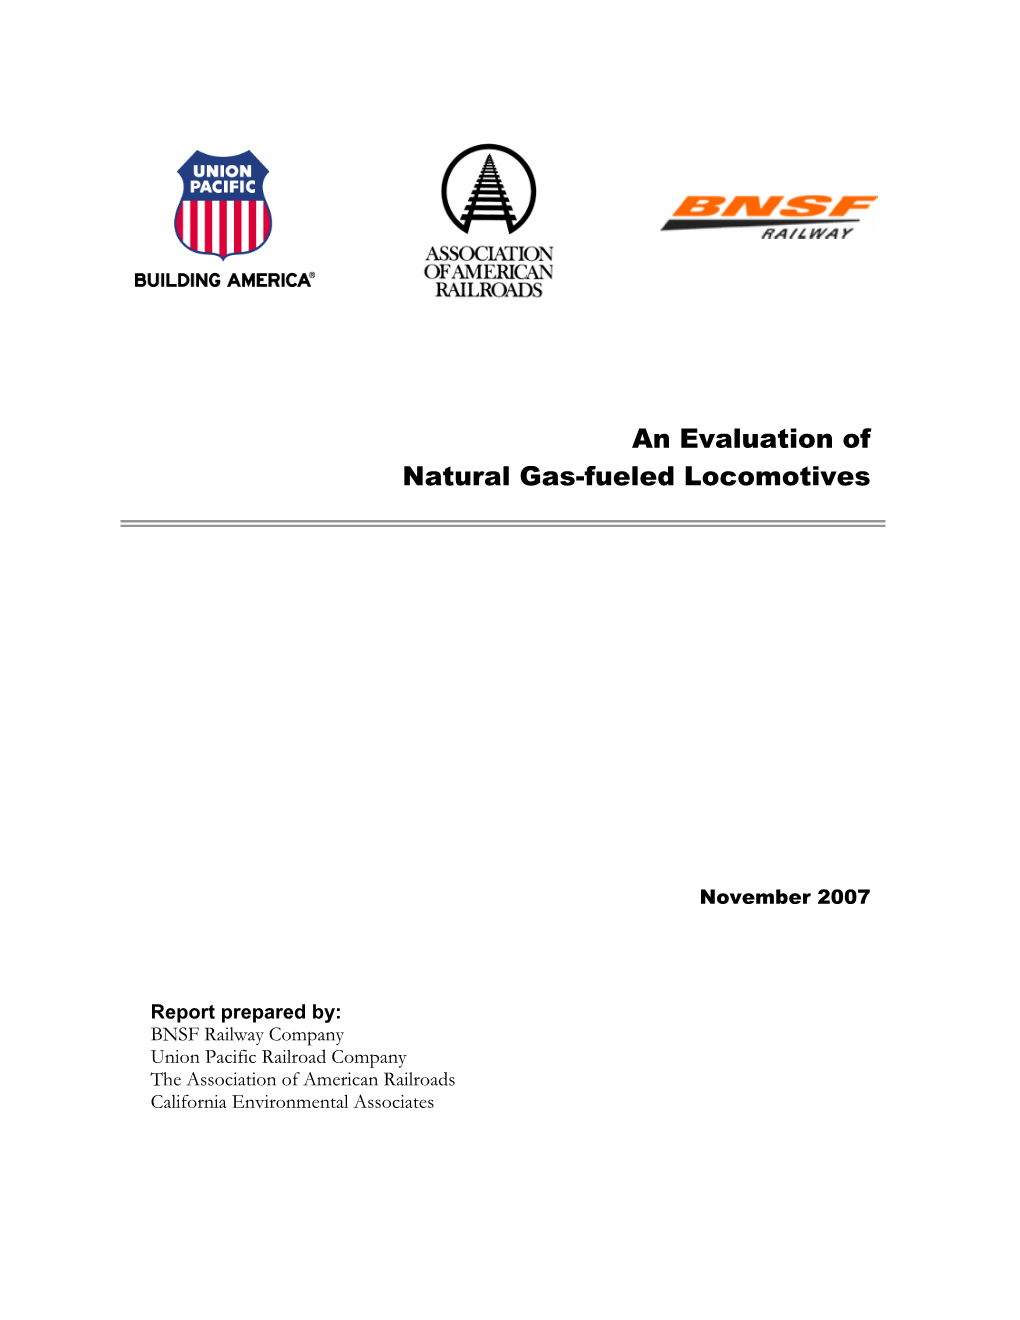 An Evaluation of Natural Gas-Fueled Locomotives